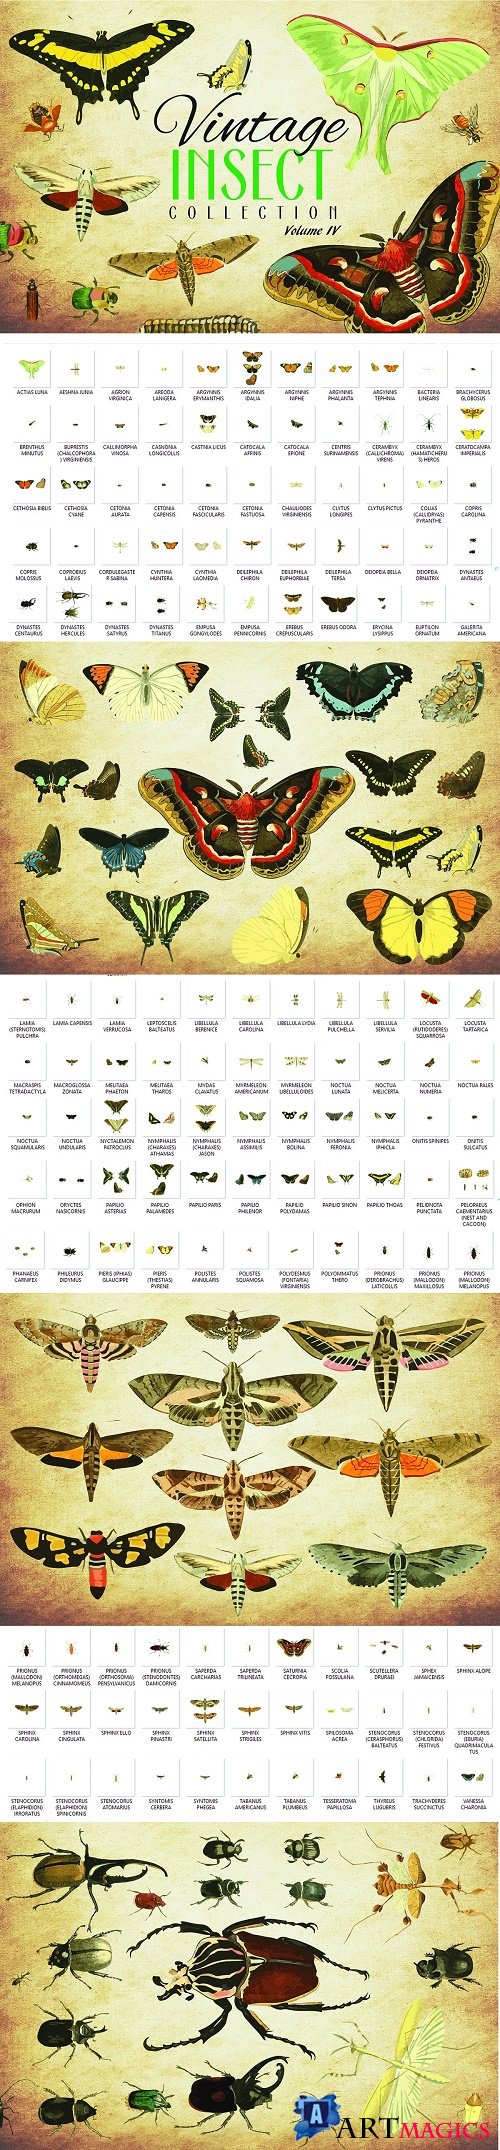 154 Vintage Insect Vector Graphics 4 - 3502662